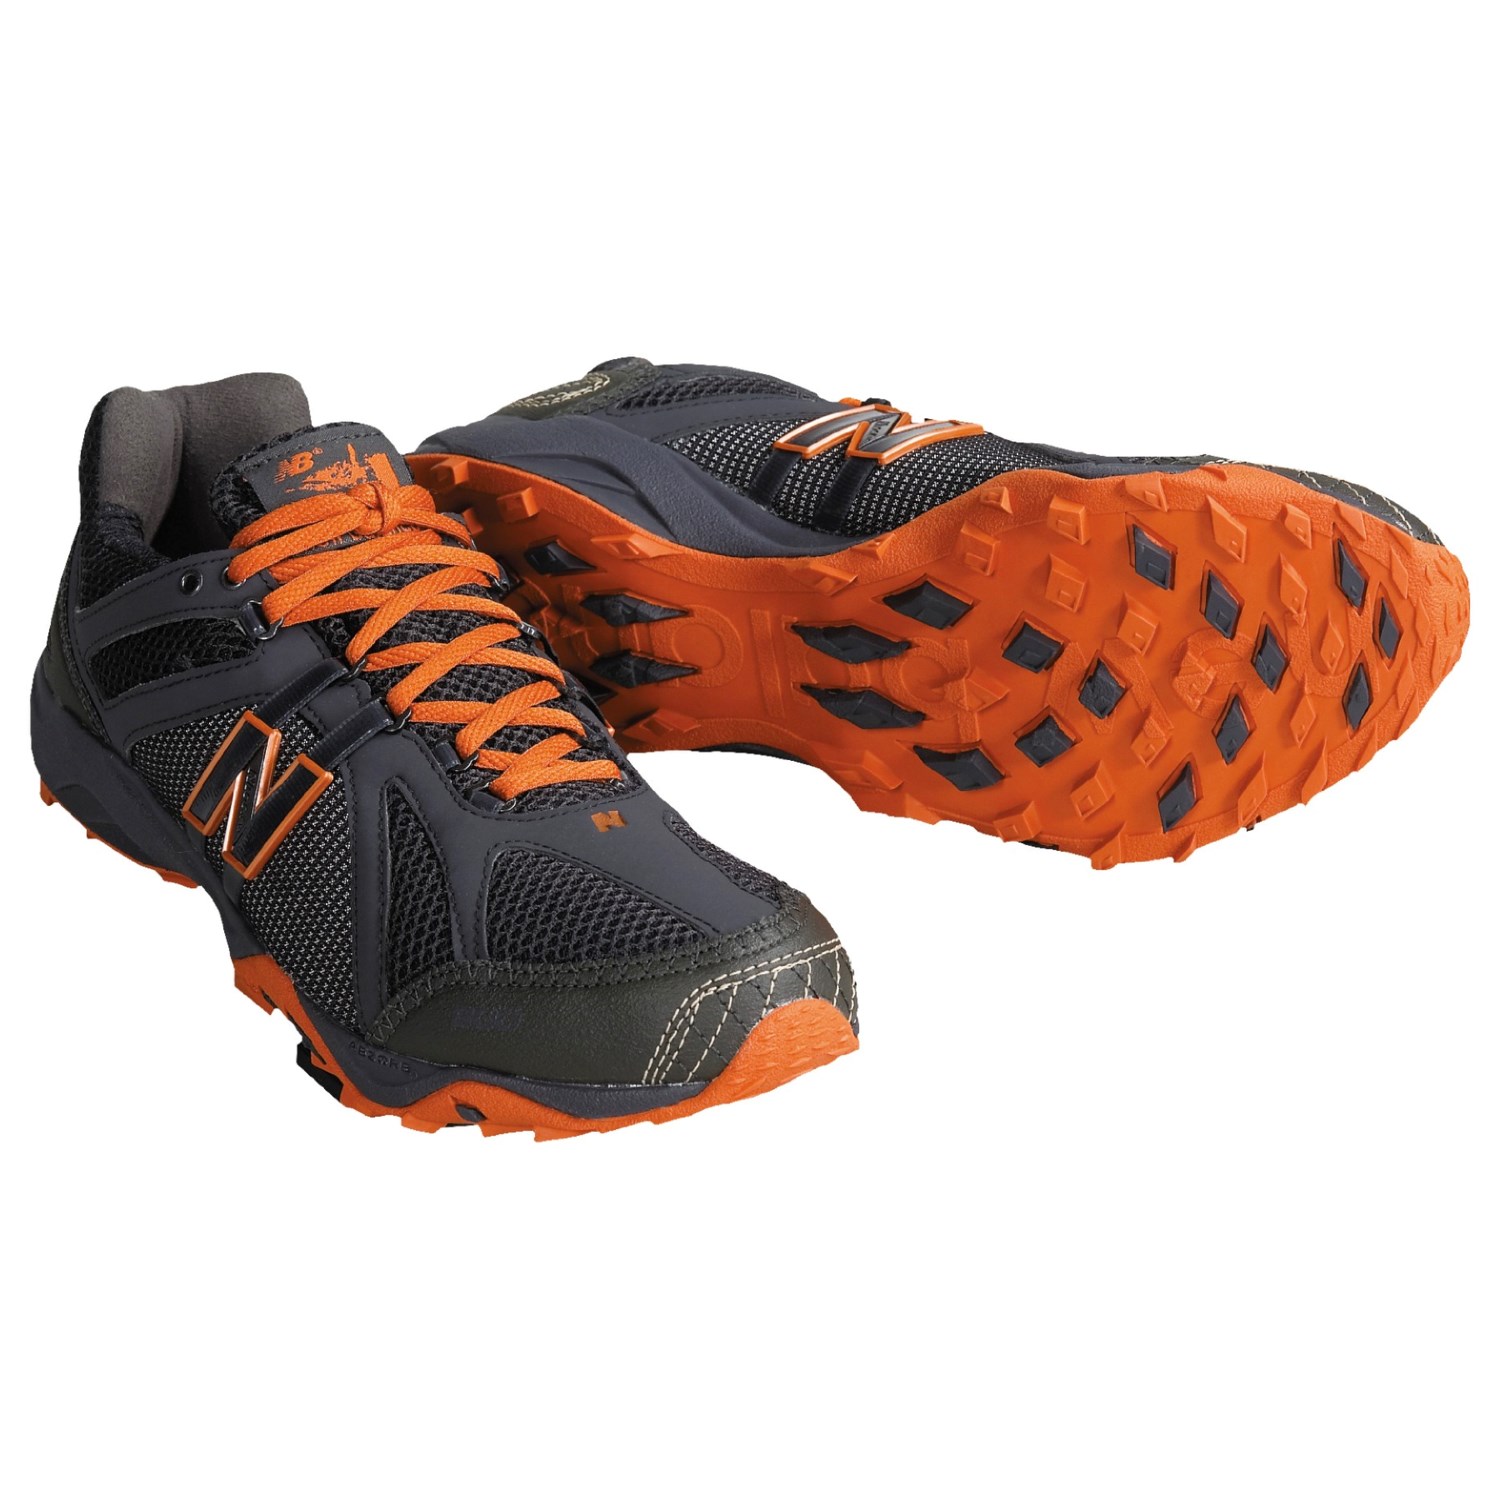 New Balance MT800 Trail Running Shoes (For Men) 1311V - Save 35%